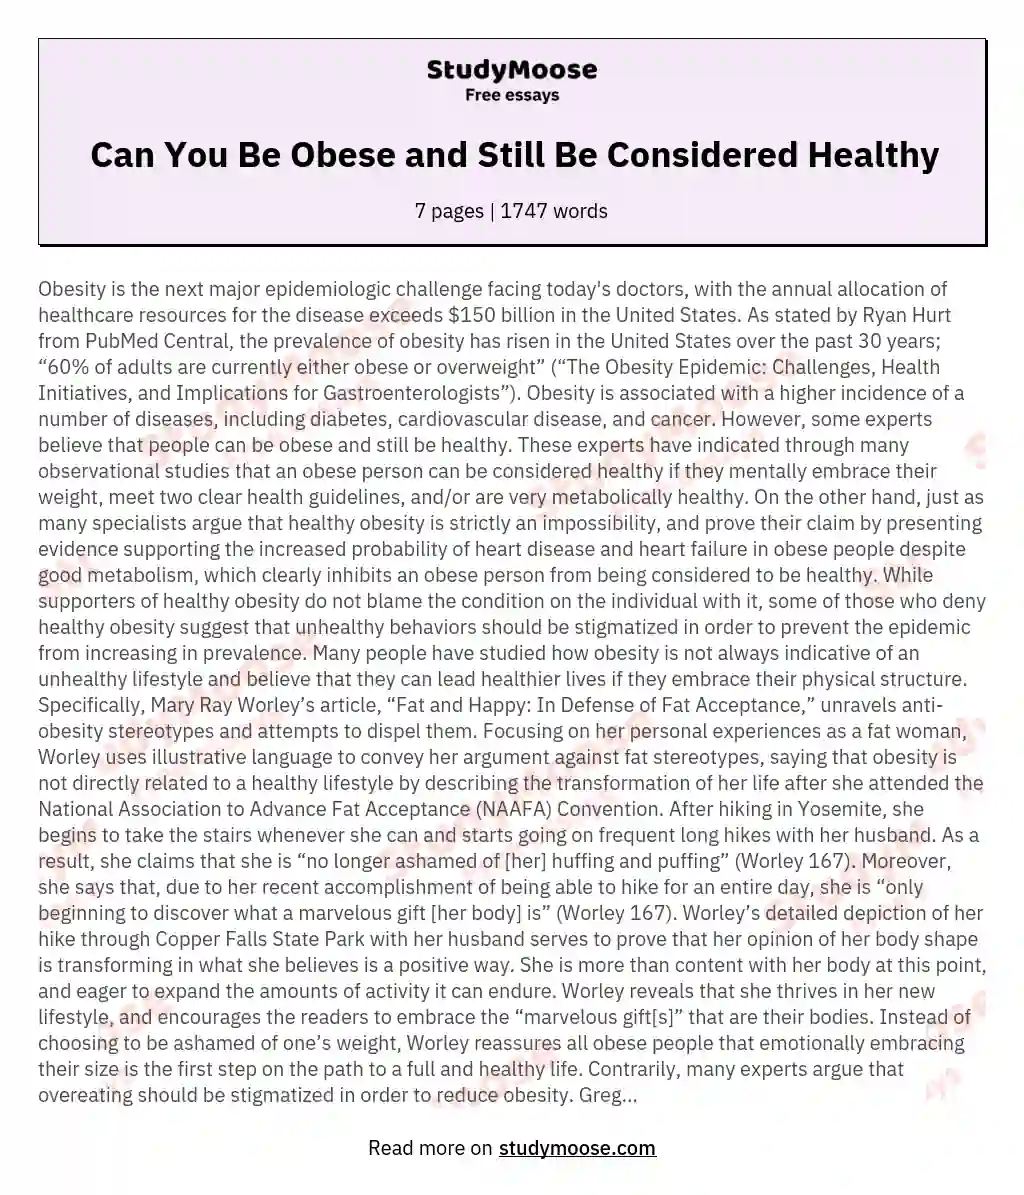 Can You Be Obese and Still Be Considered Healthy essay